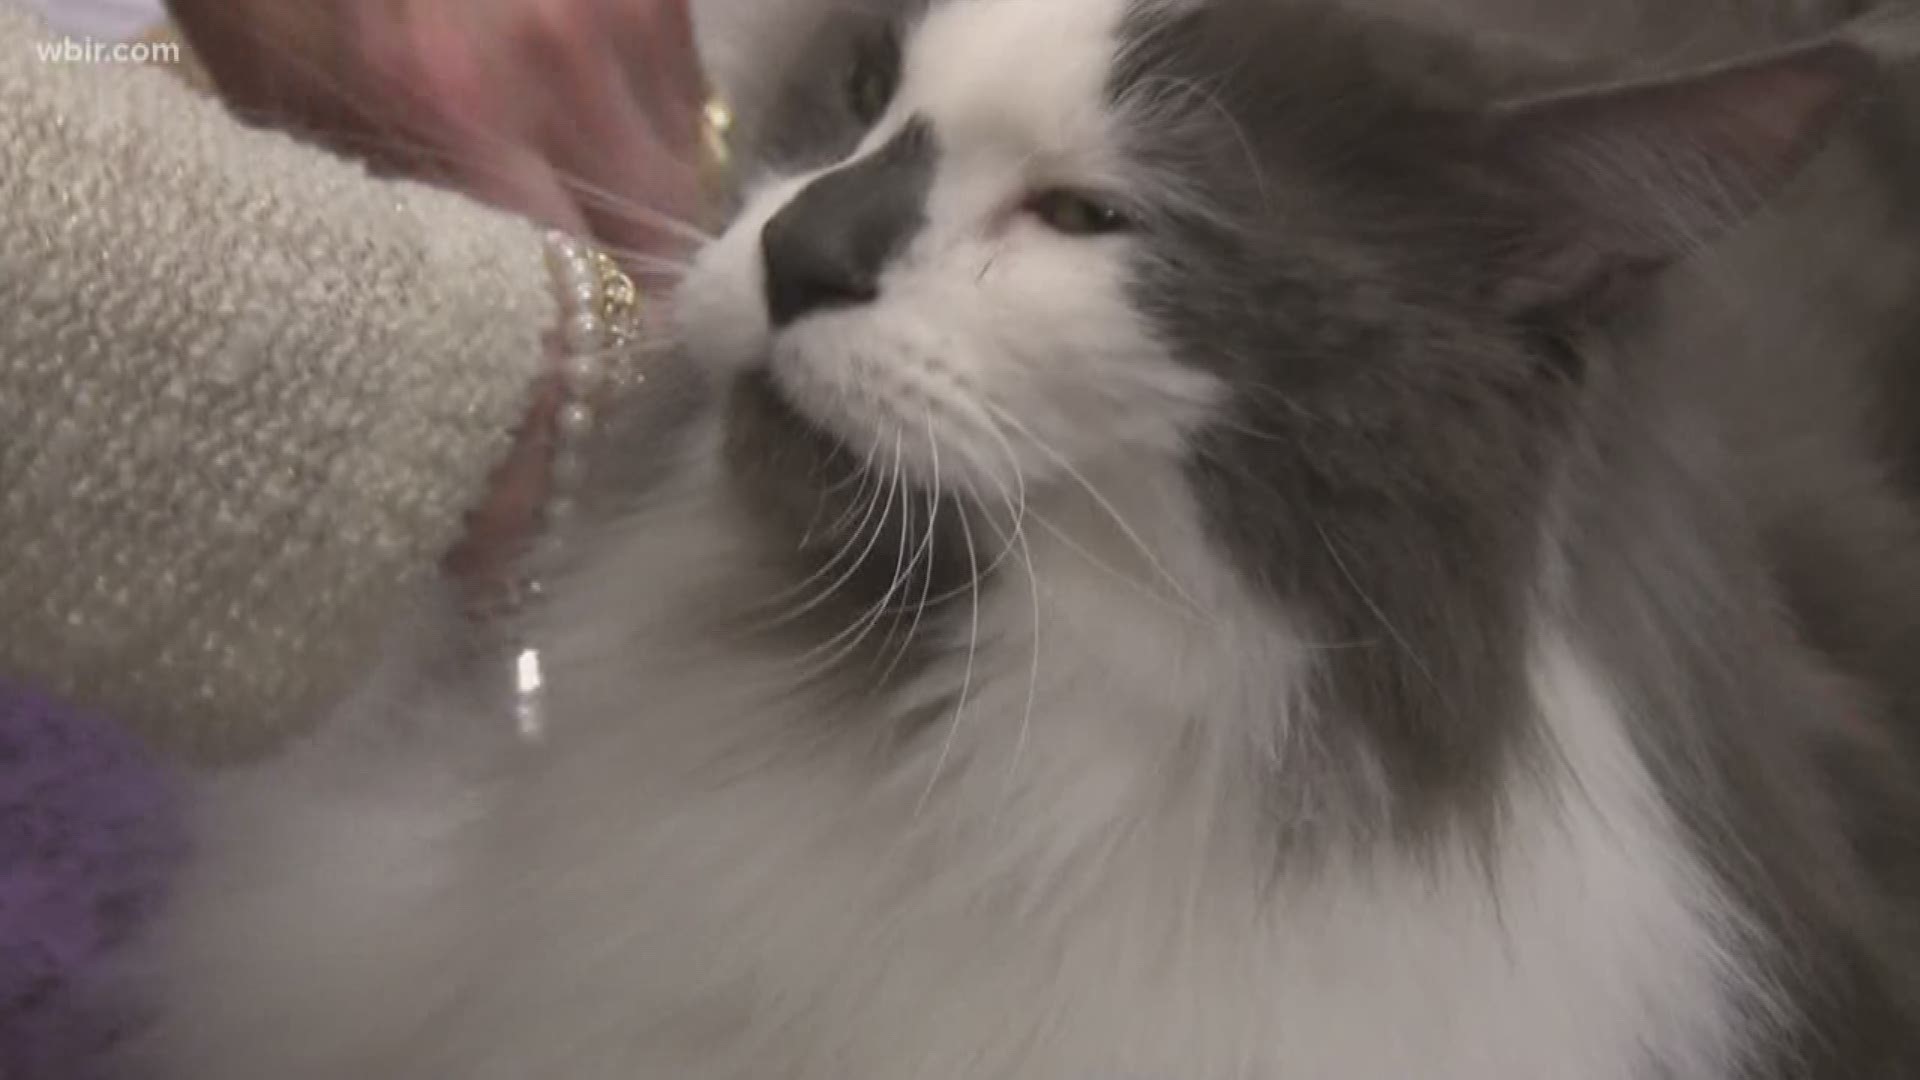 Cat lovers were able to show their support for cats of all breeds at the 41st Annual Tenn. Valley Cat Fanciers Cat Show.